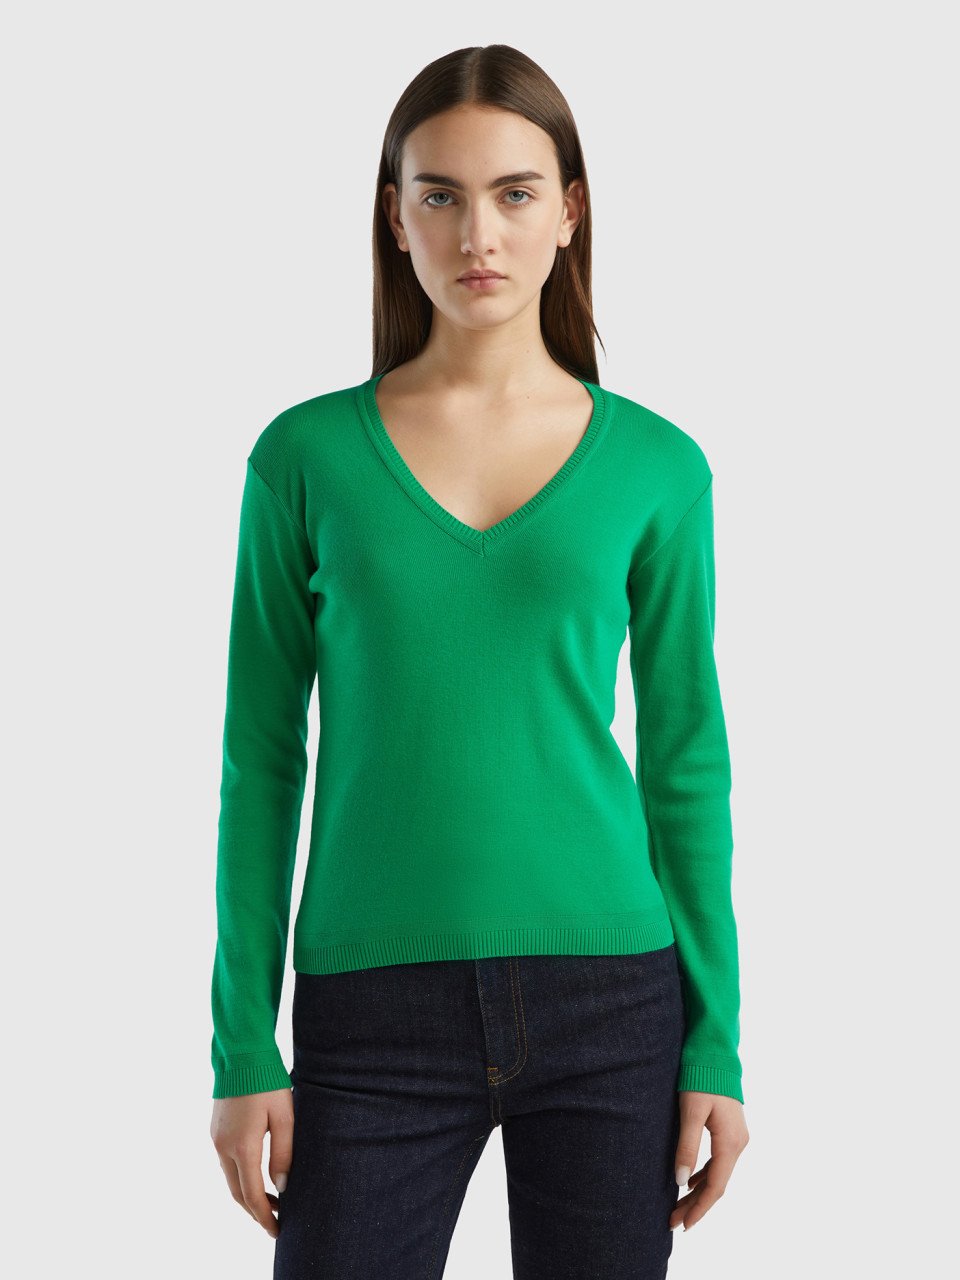 Benetton Online exclusive, V-neck Sweater In Pure Cotton, Green, Women